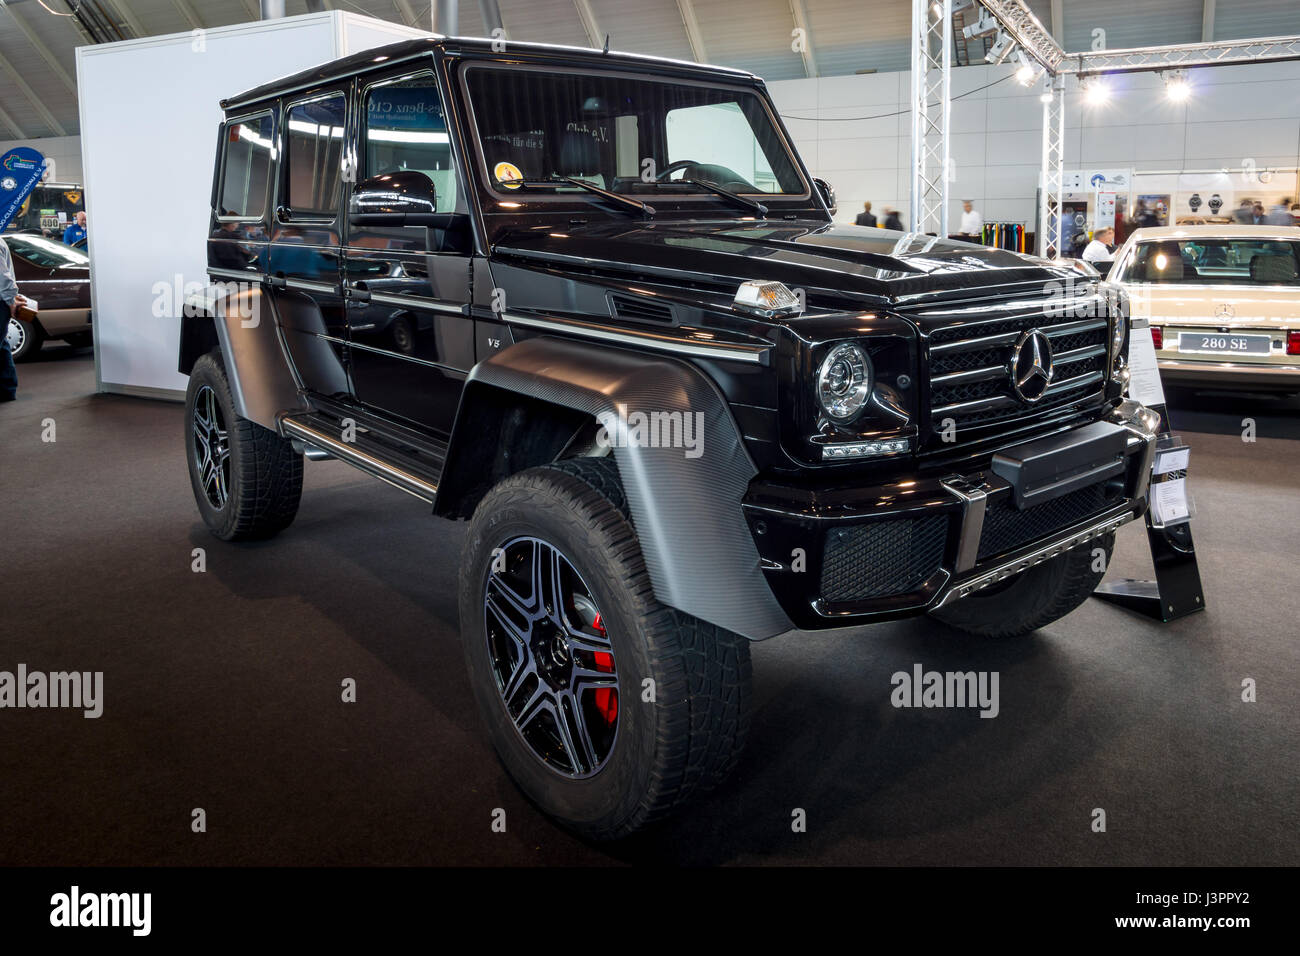 Mercedes-Benz Prototyp Trial Offroad 4x4x4 Chevy for sale, Car